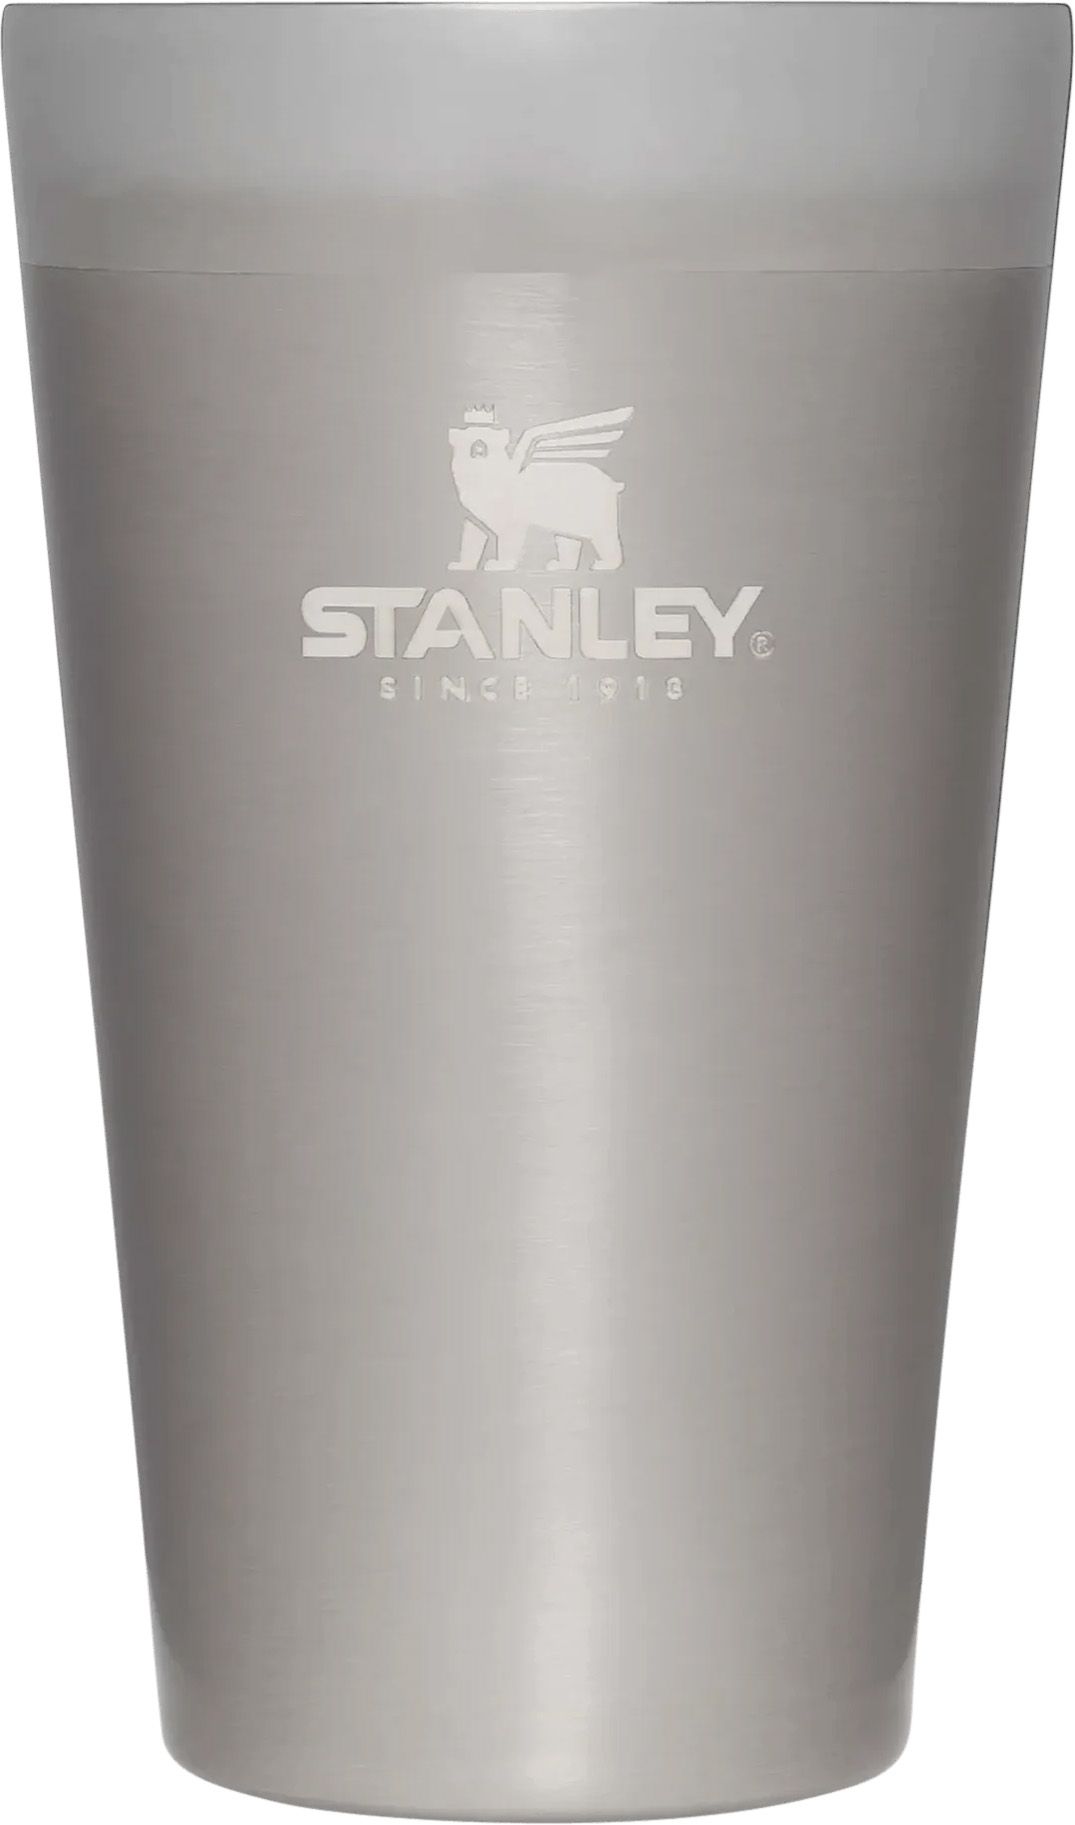 Photos - Other Accessories Stanley 16 oz. Adventure Stacking Pint Glass, Stainless Steel 23STAASTNLY1 